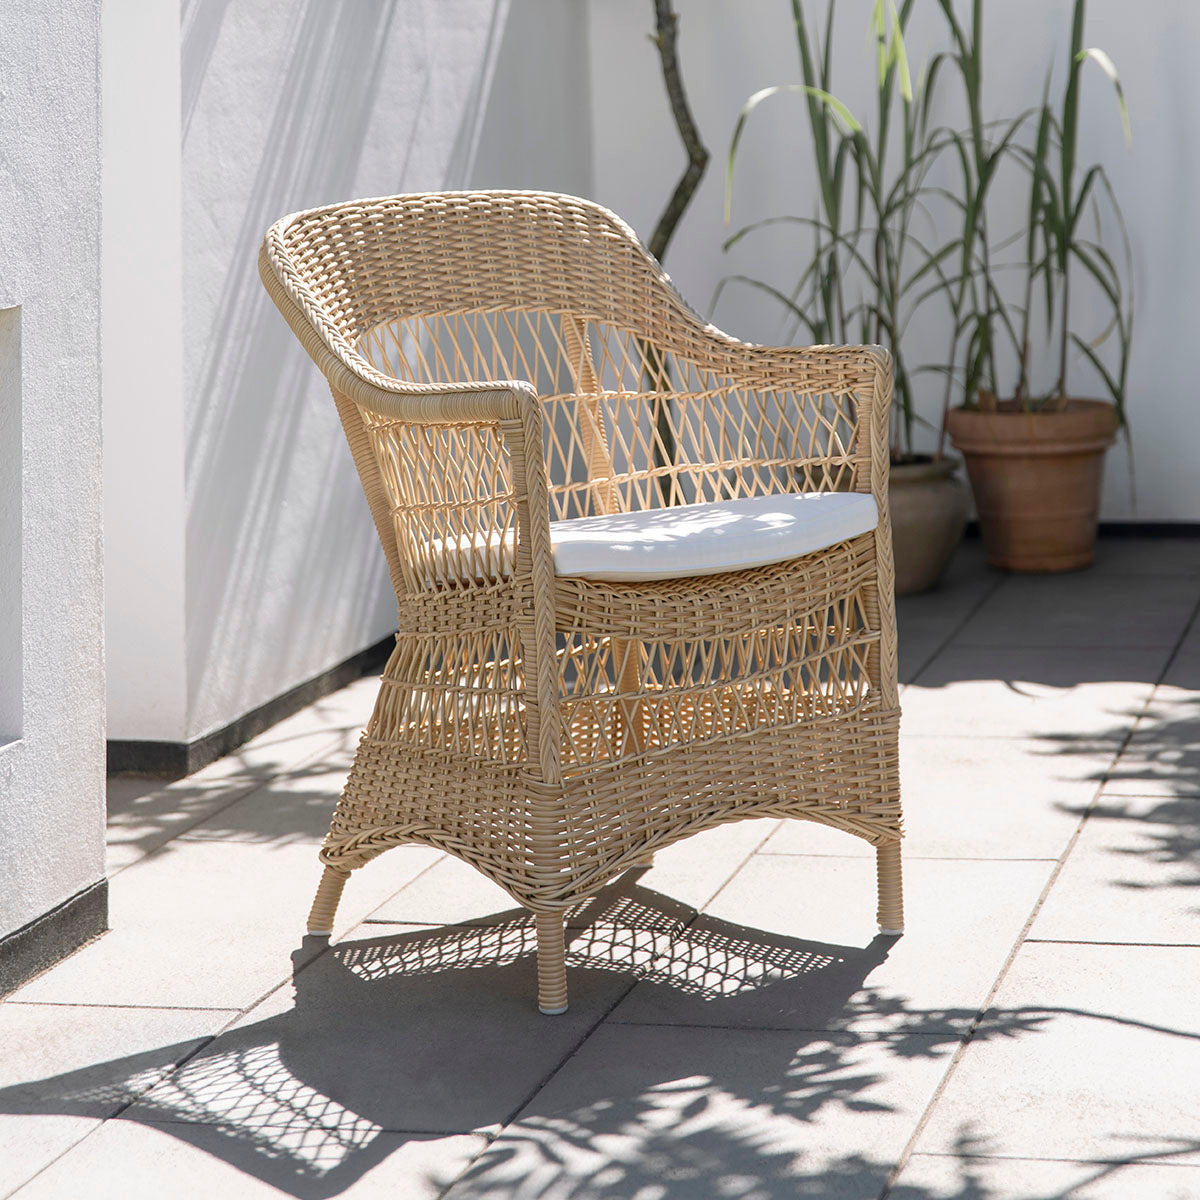 Charlot Lounge Chair by Sika